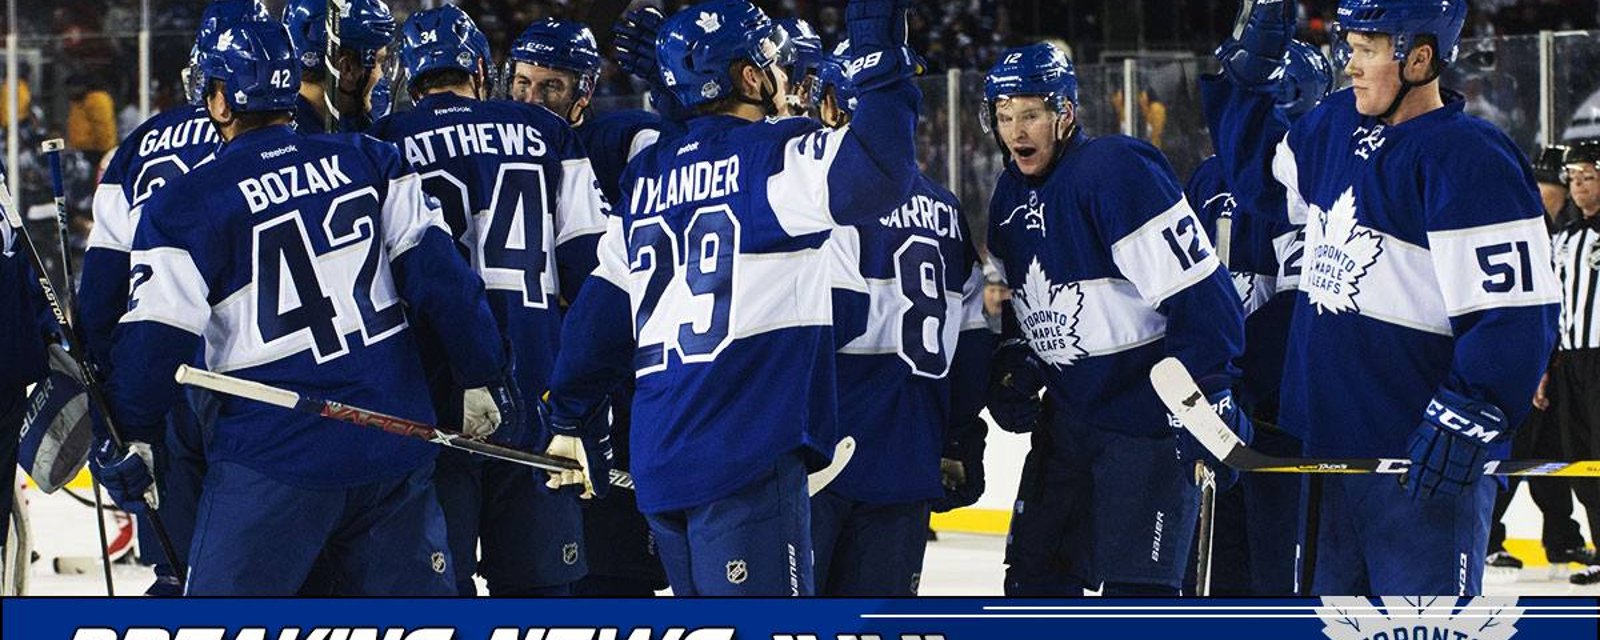 Breaking: Leafs make last minute roster change ahead of tonight's game.